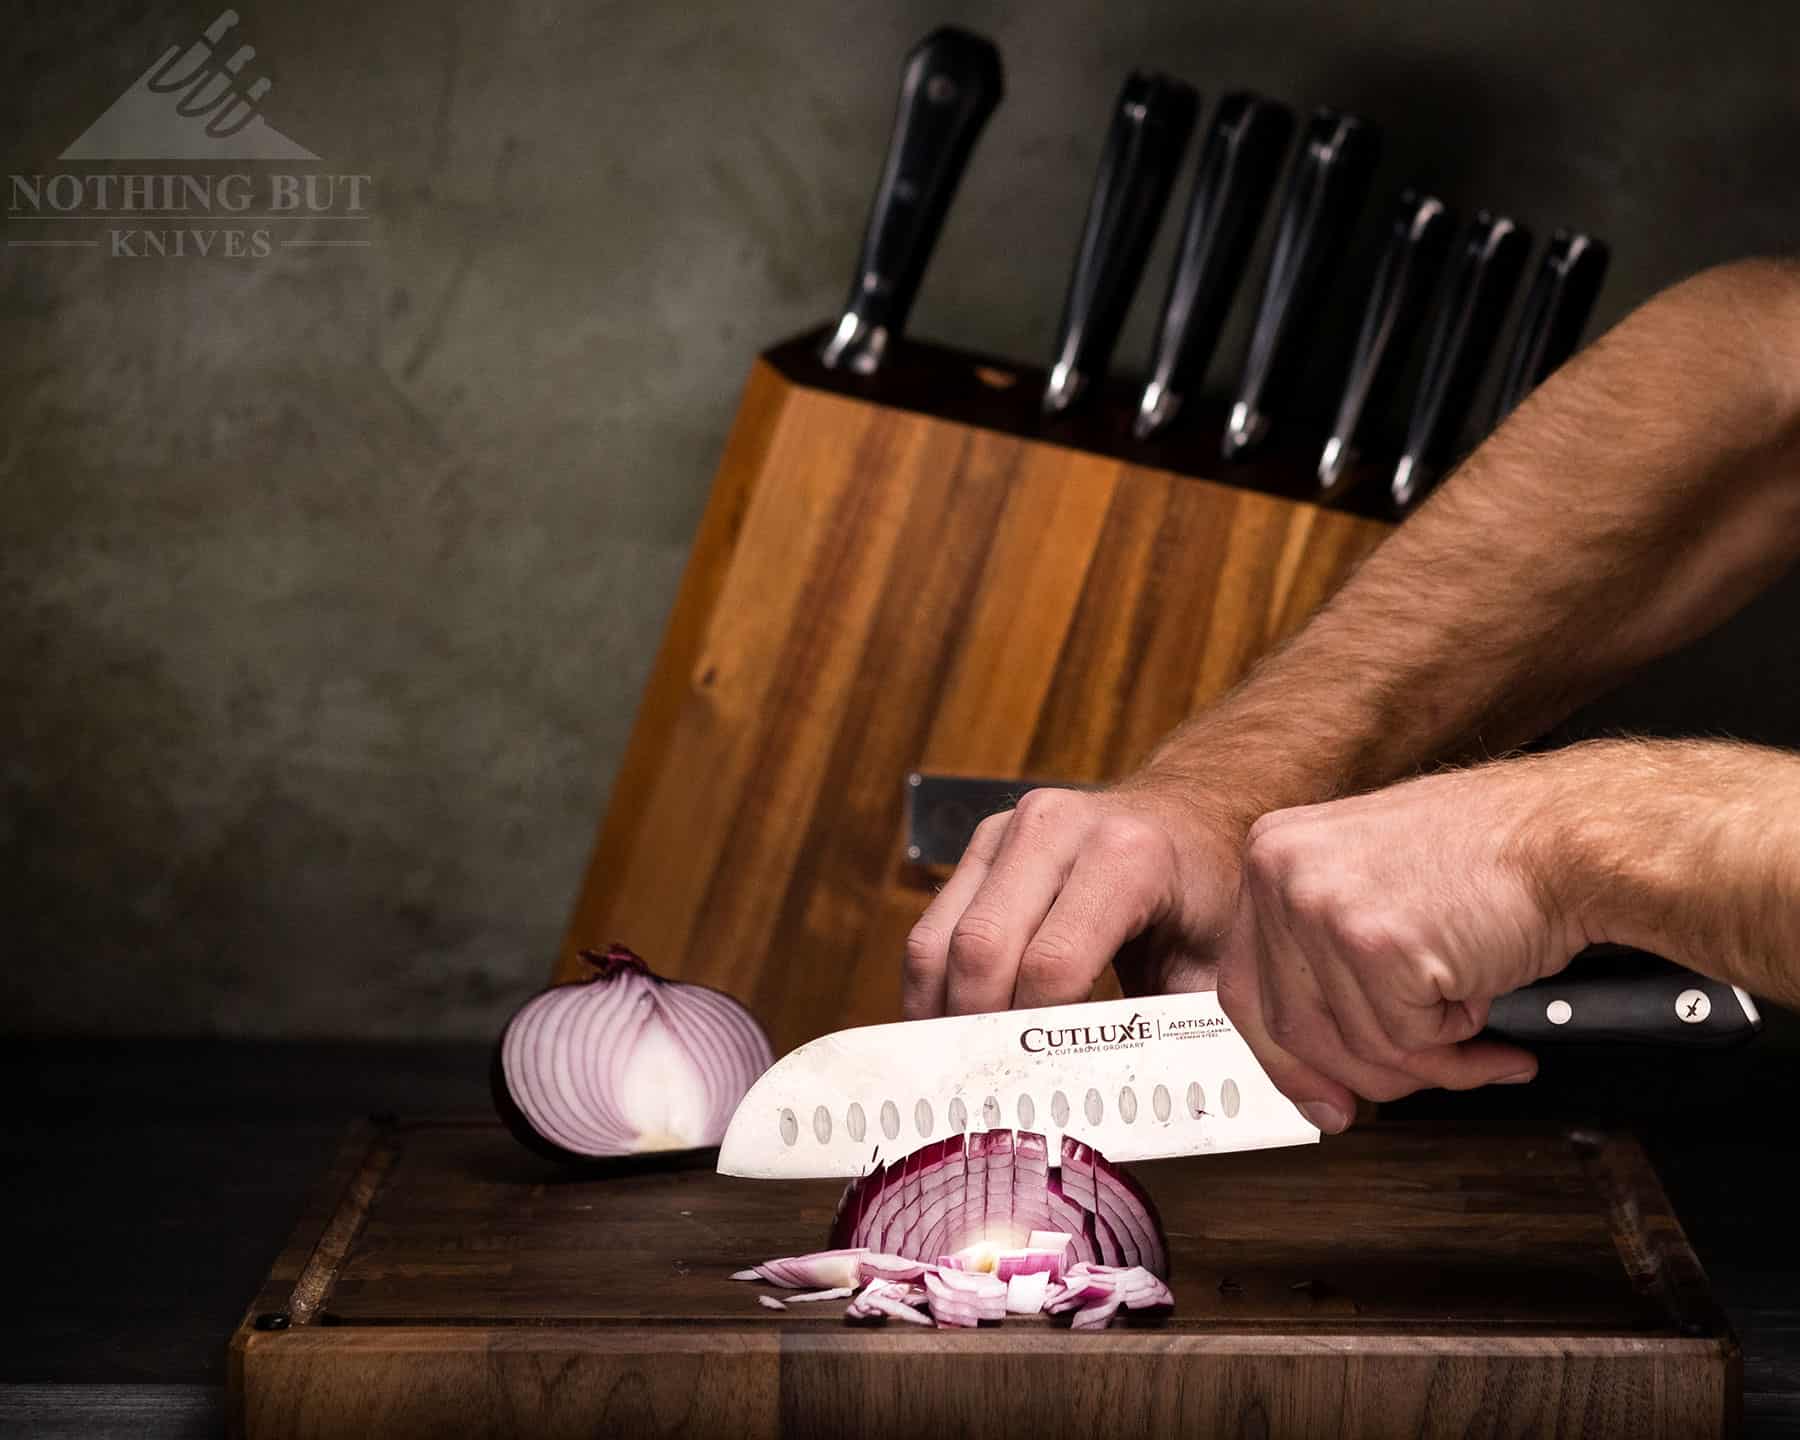 Cutluxe Kitchen Knives Offer Quality and Style Without Ever Having to Spend  Much, As a Home Cook